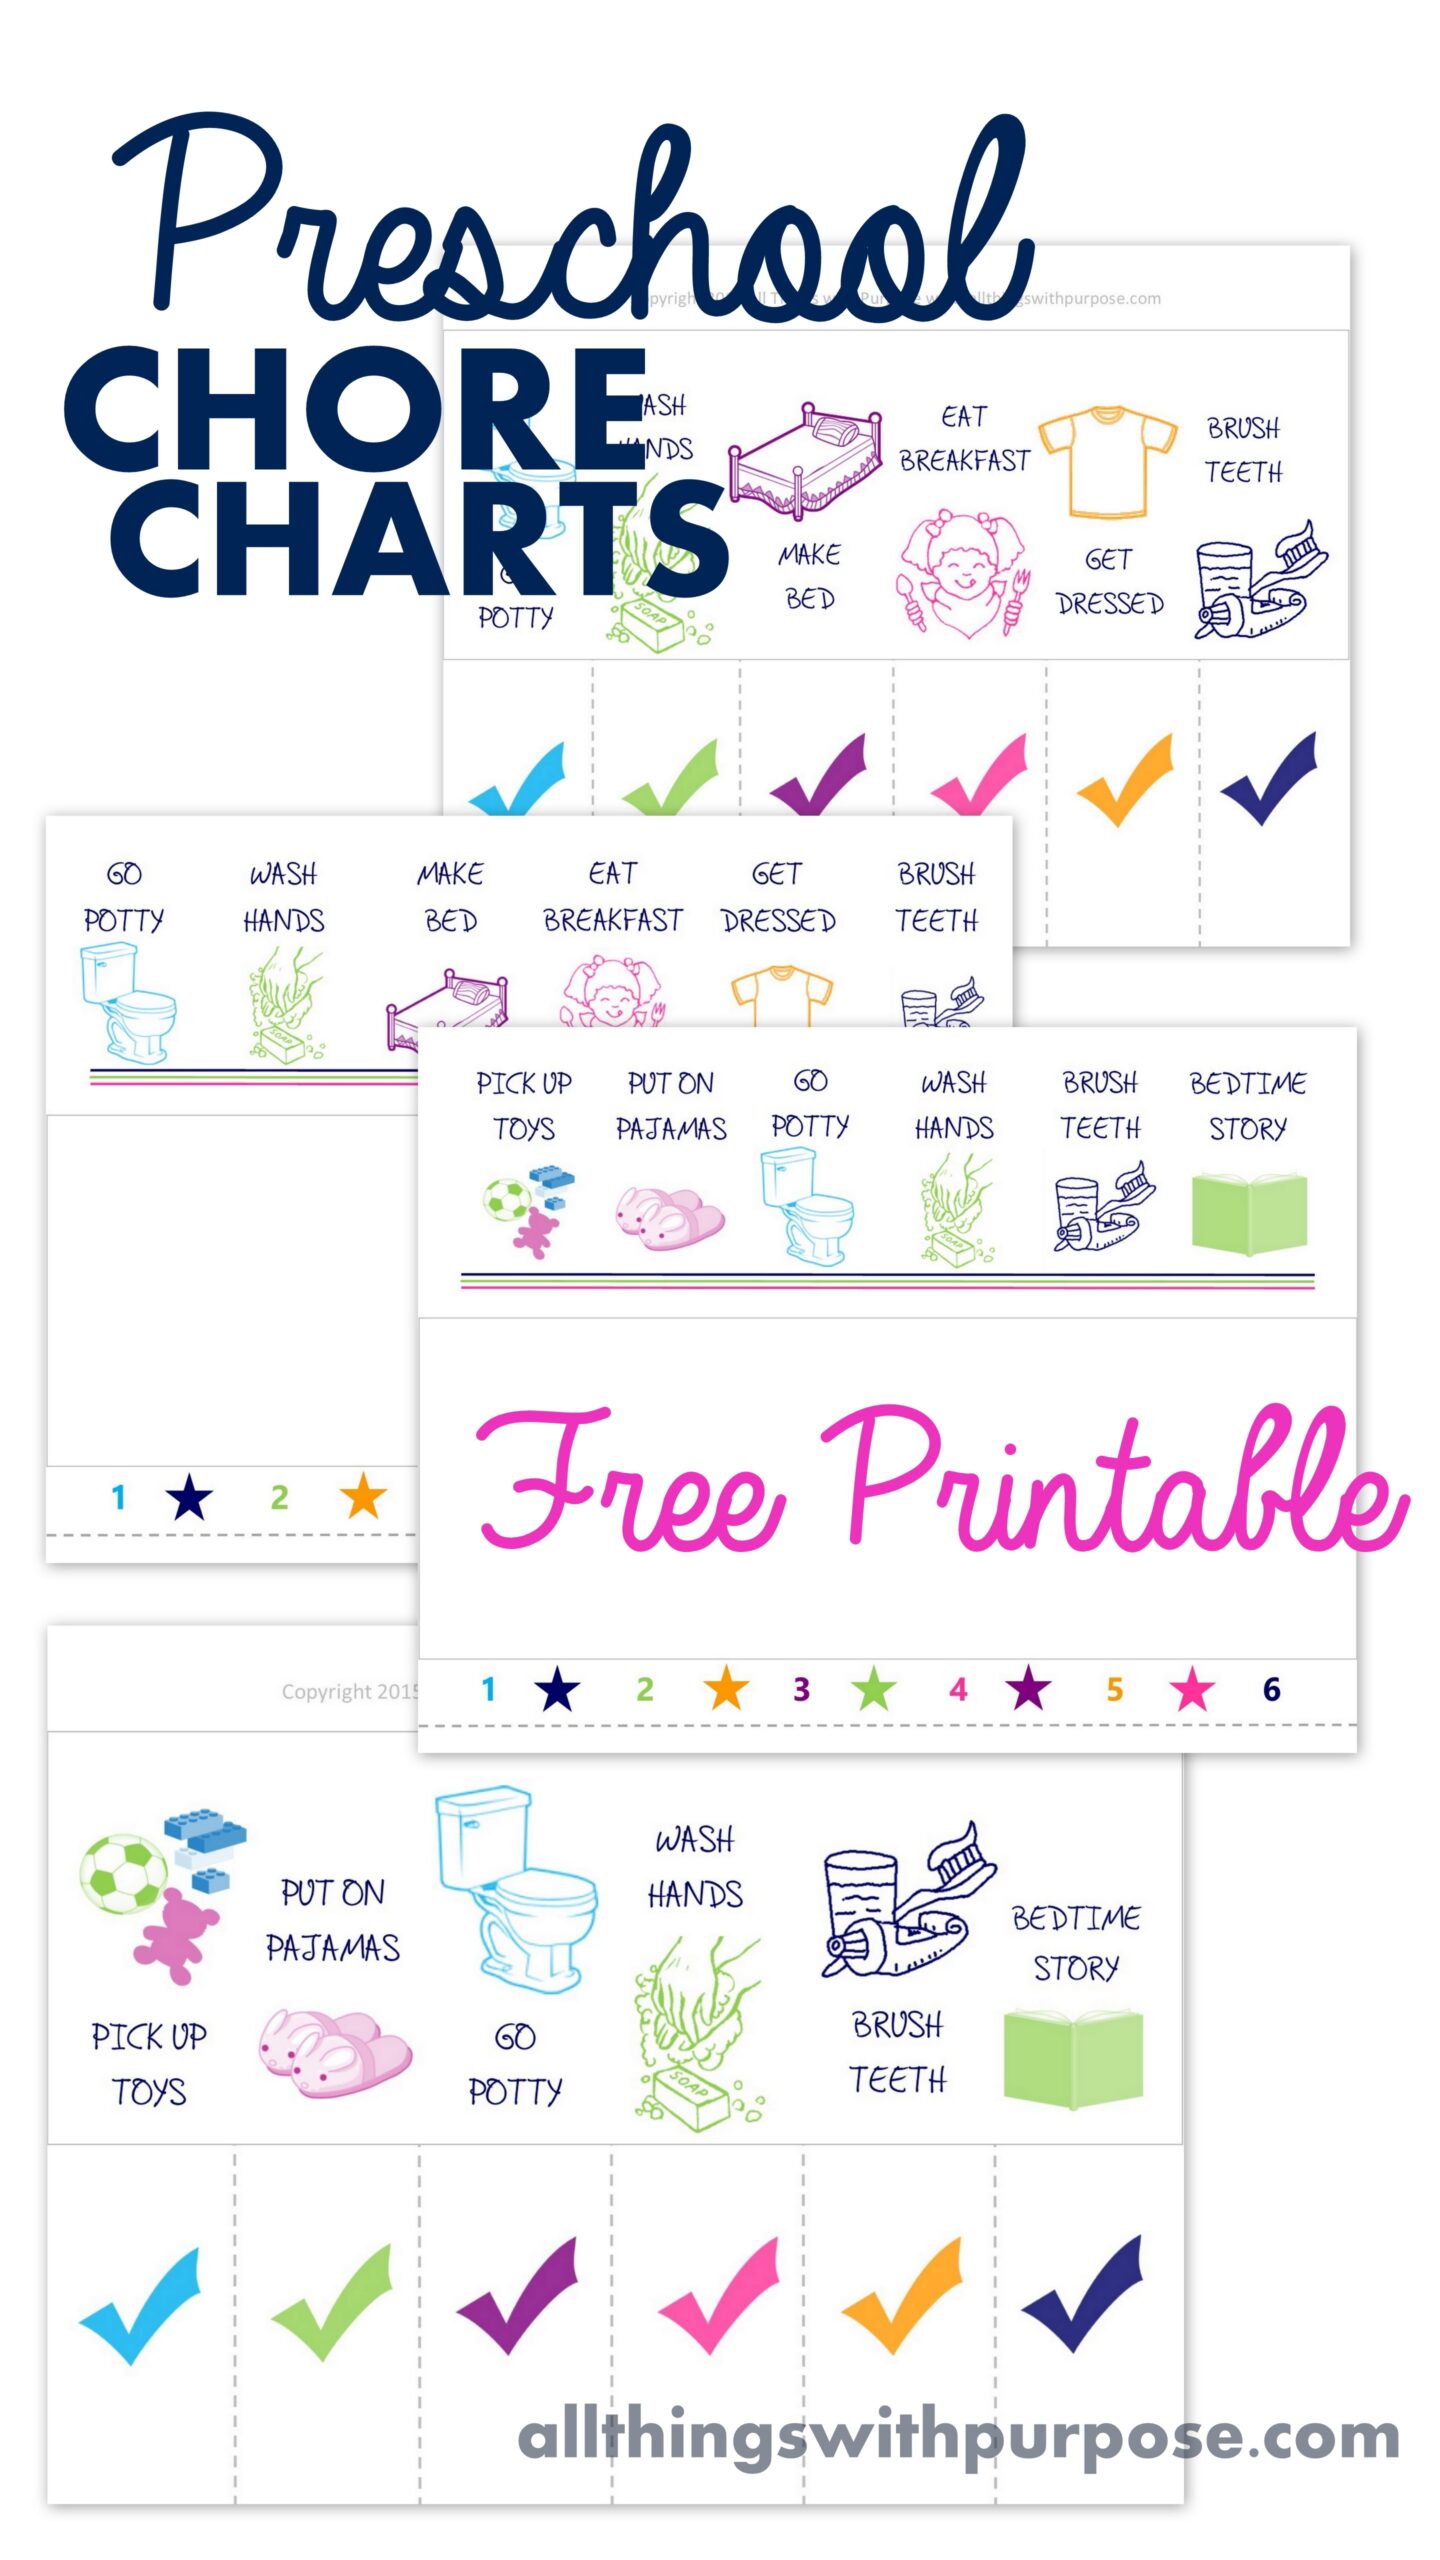 Free Printable Preschool Chore Charts - Free Printable Chore Charts For Kids With Pictures